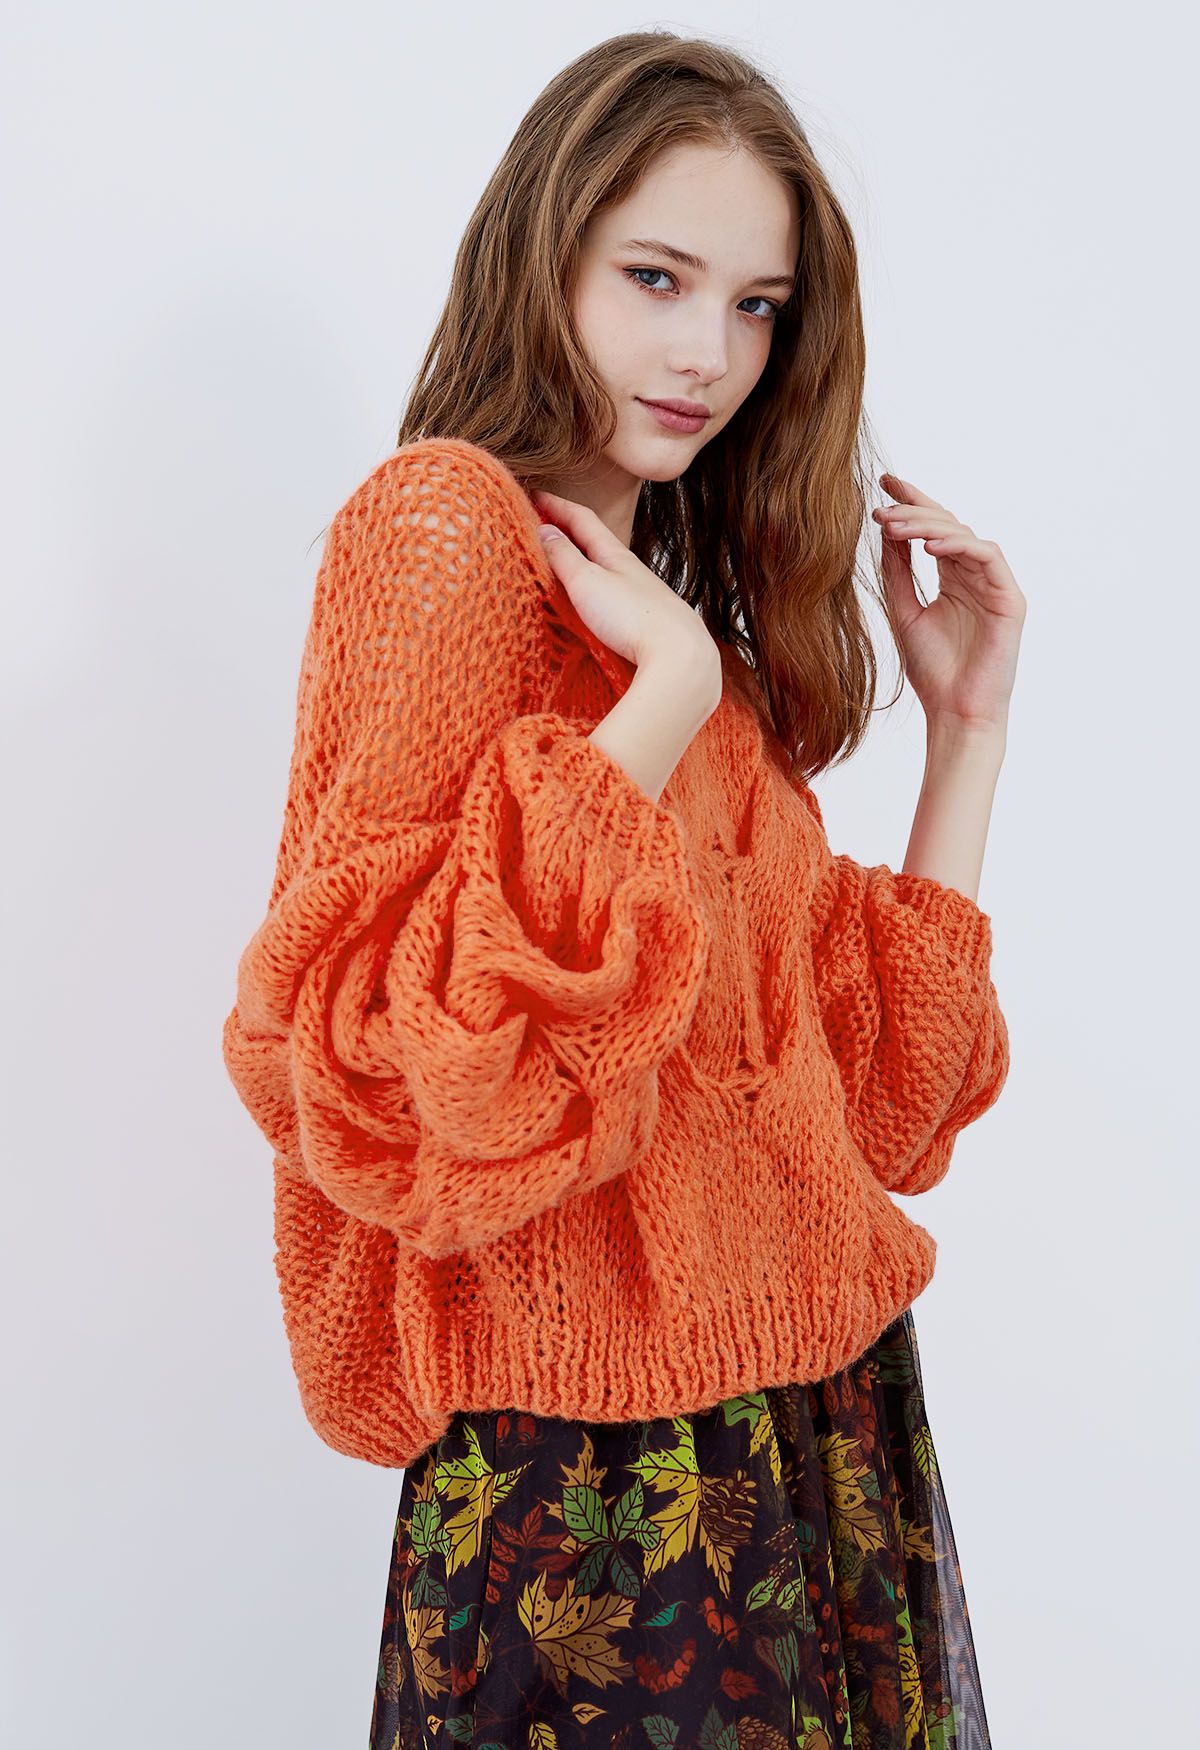 Hand-Knit Puff Sleeves Sweater in Orange